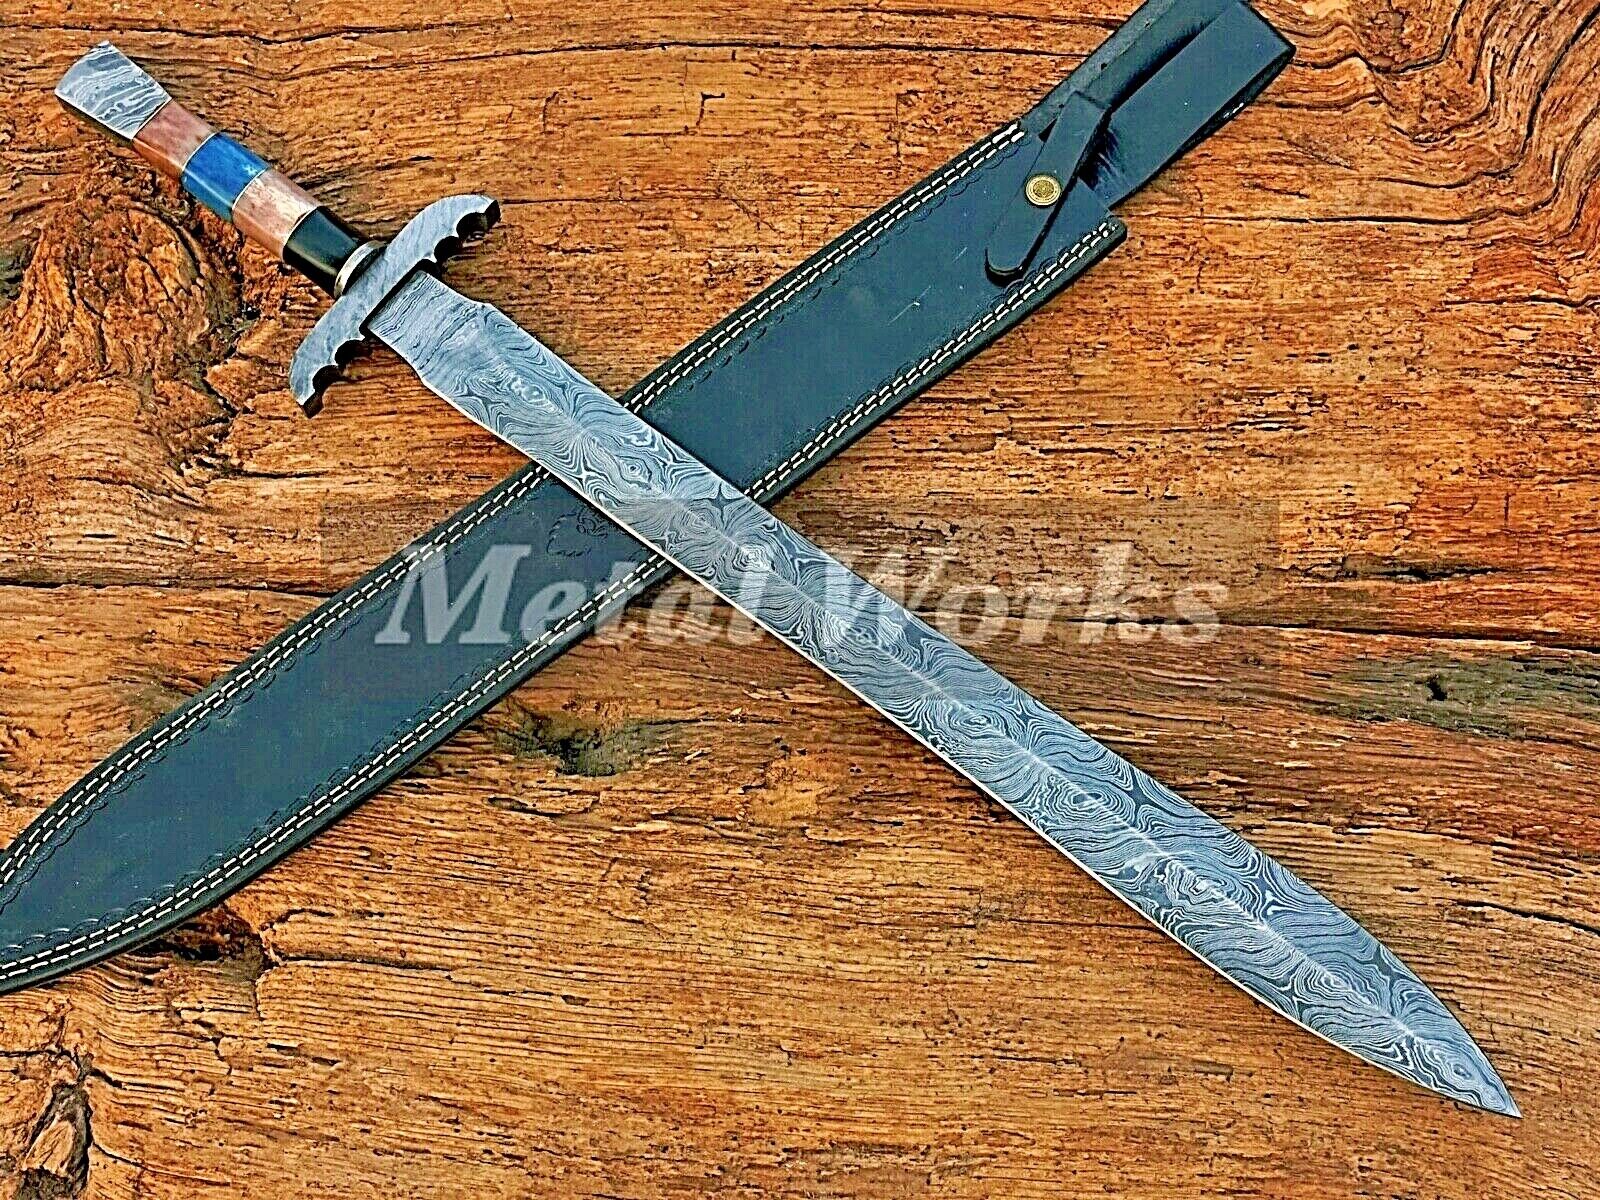 Handmade Functional Medieval Templar Knights Sword With Leather Sheath